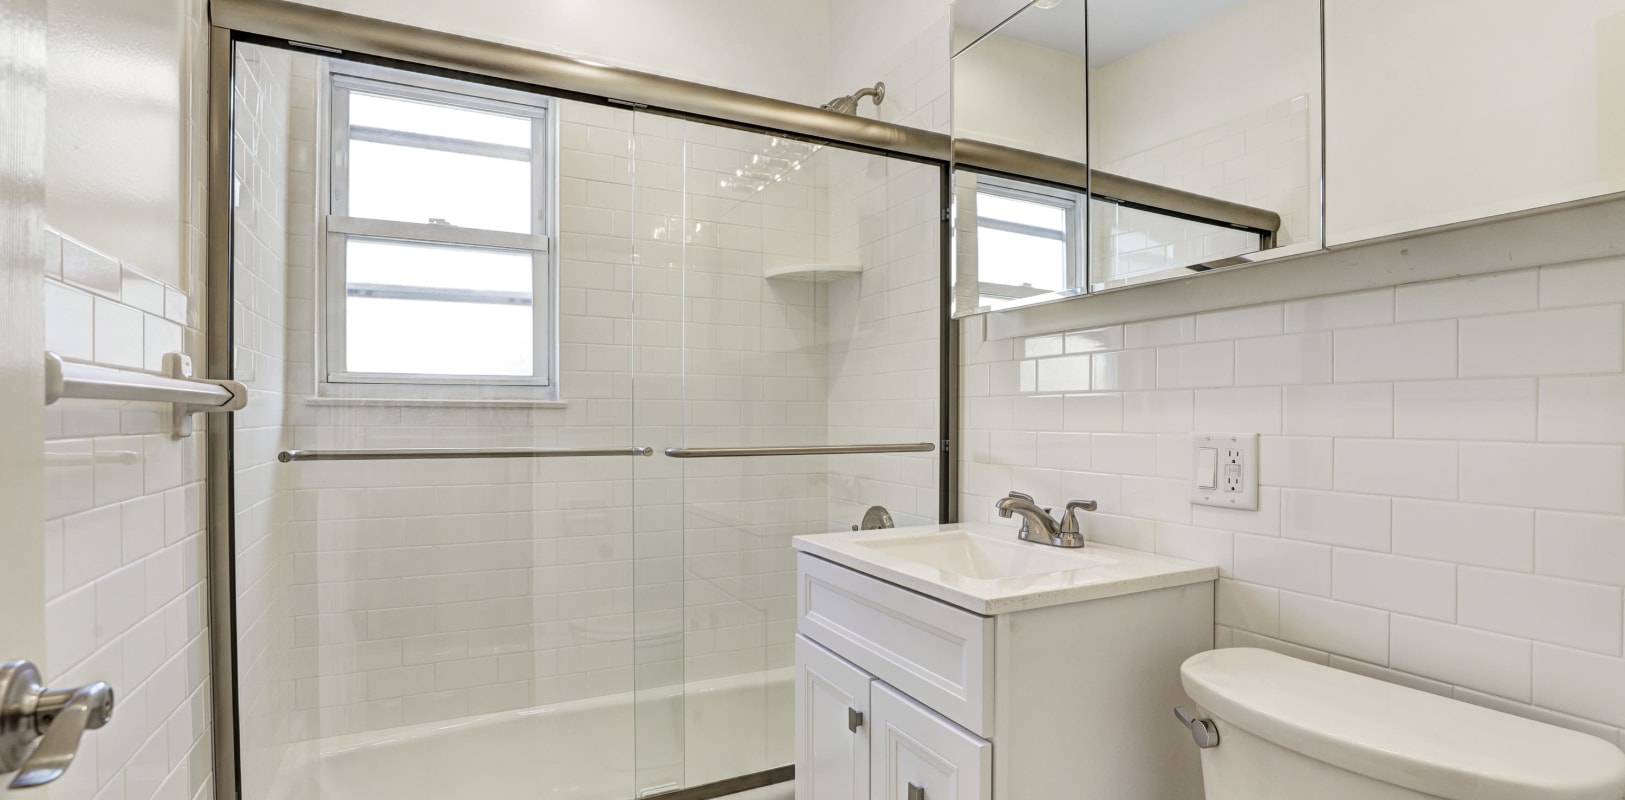 Spacious bathroom with an oval tub at General Wayne Townhomes and Ridgedale Gardens in Madison, New Jersey